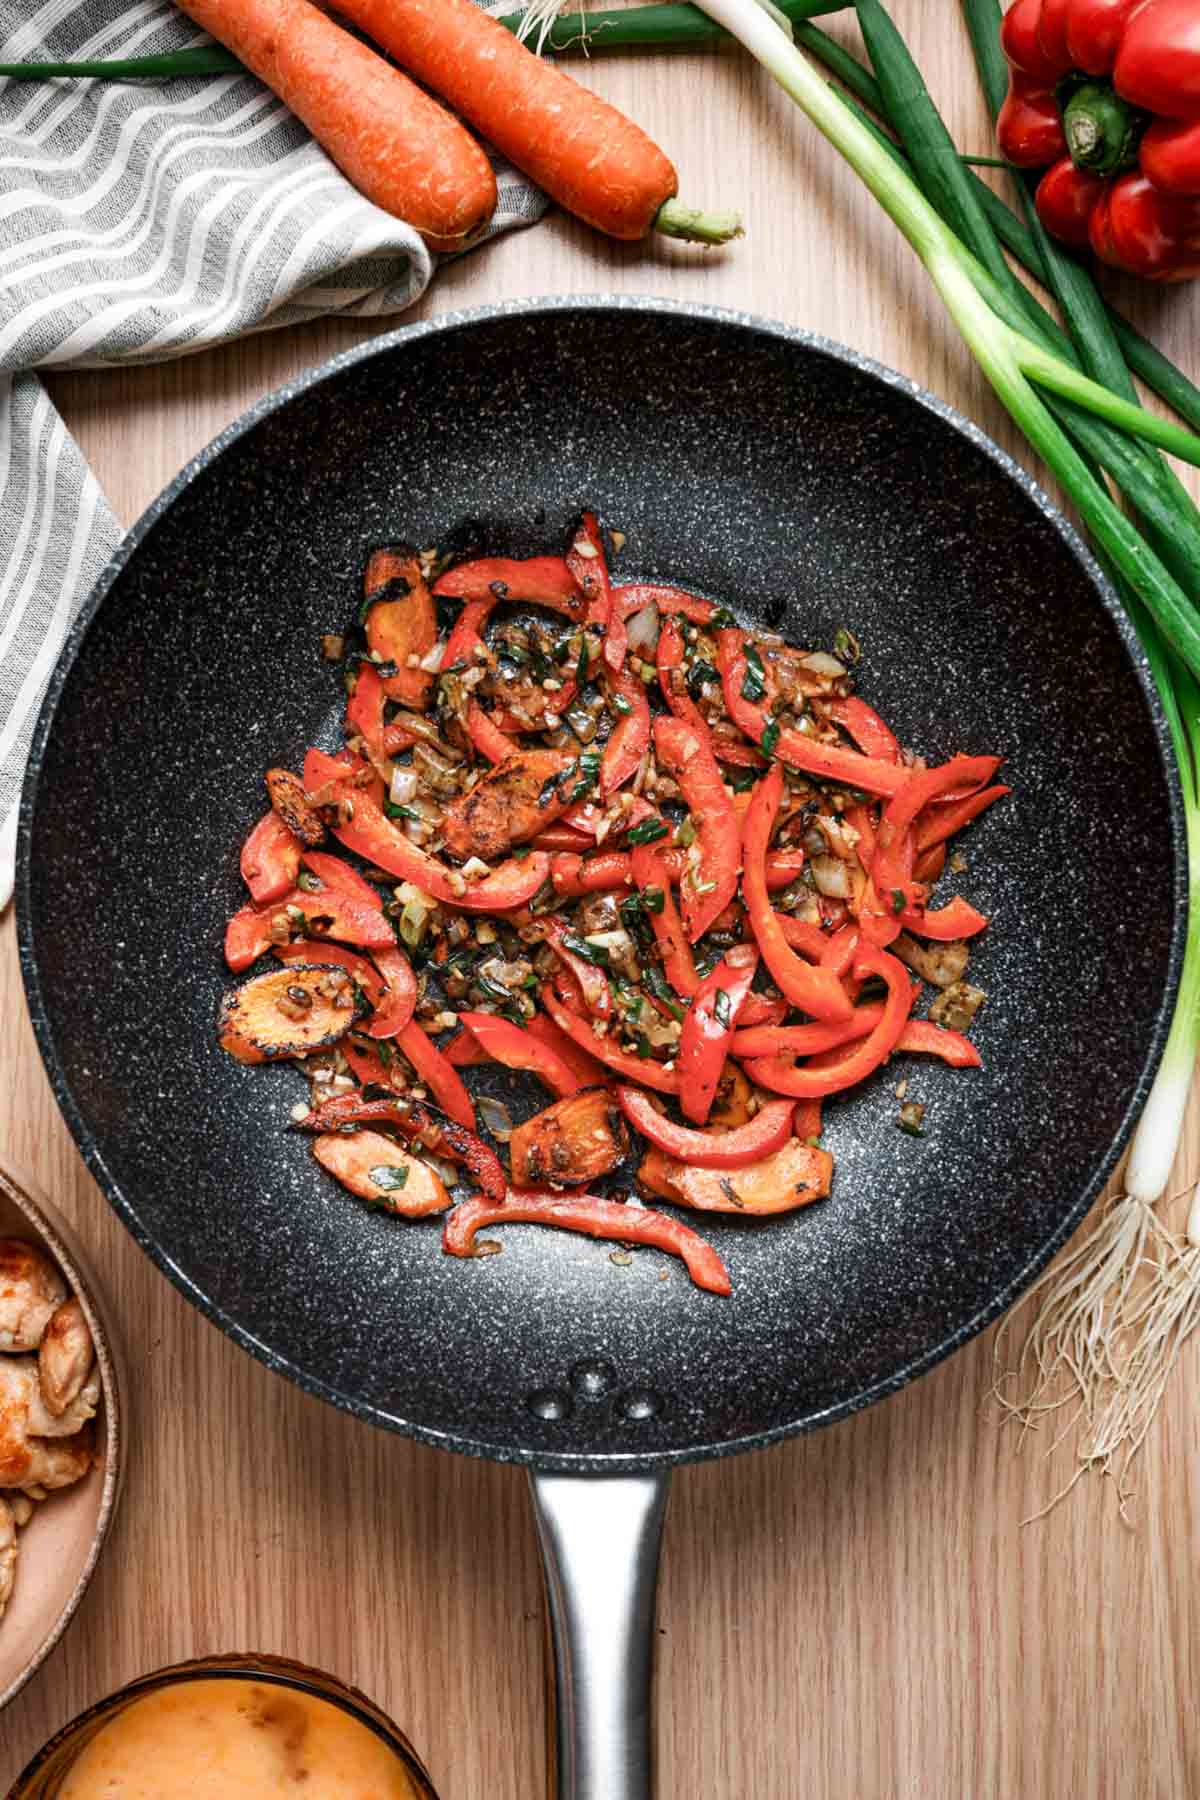 red peppers and vegetables cooking in a skillet